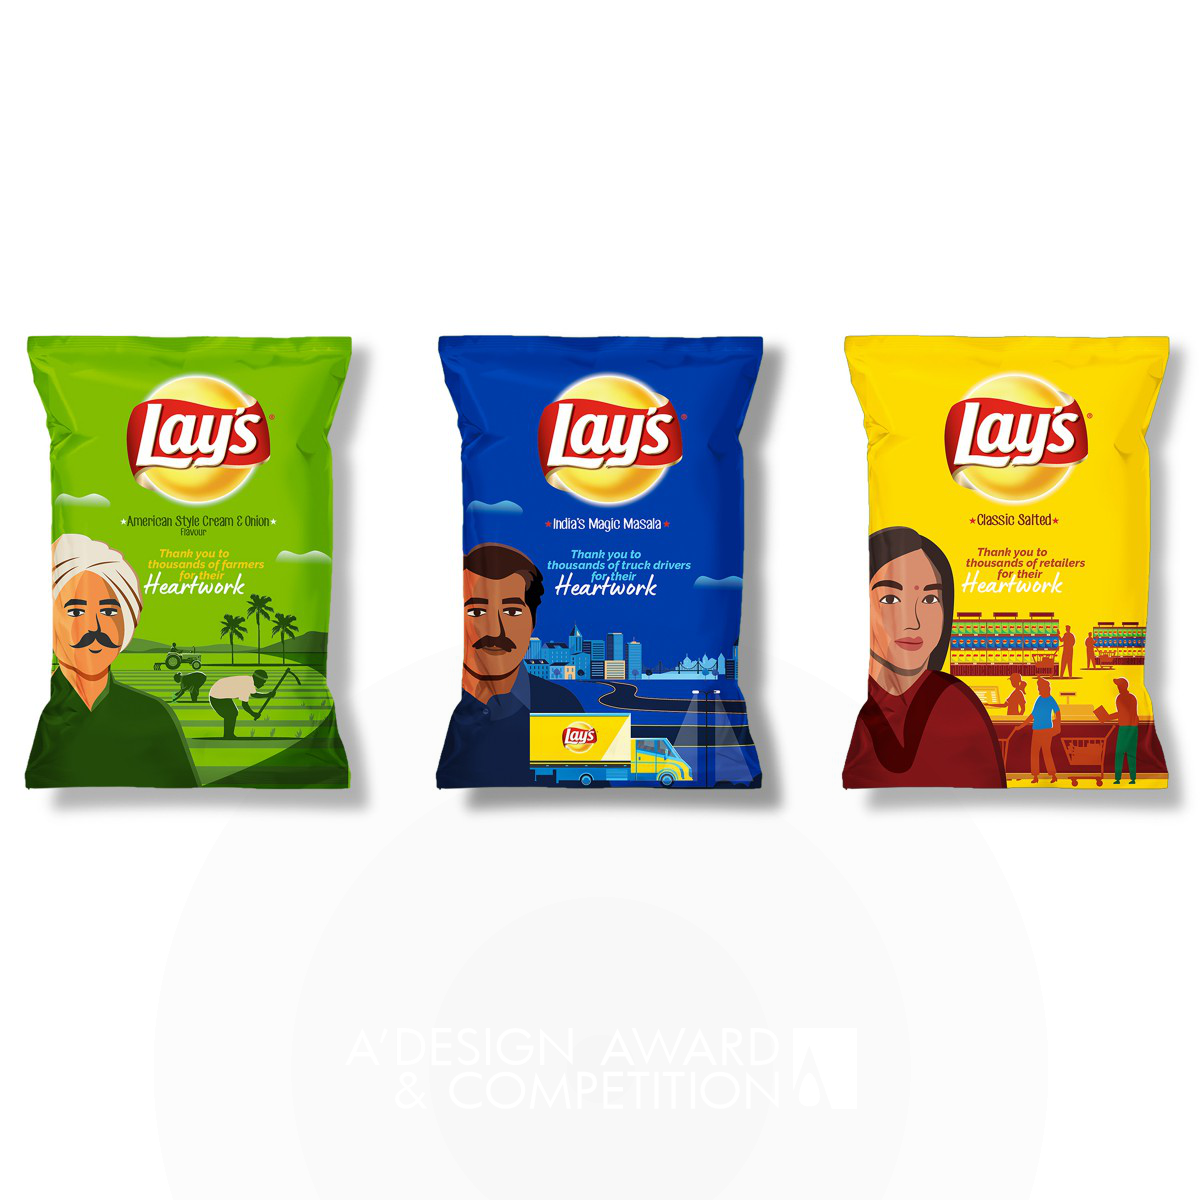 PepsiCo Design and Innovation wins Silver at the prestigious A' Advertising, Marketing and Communication Design Award with Lays Heartwork Campaign .